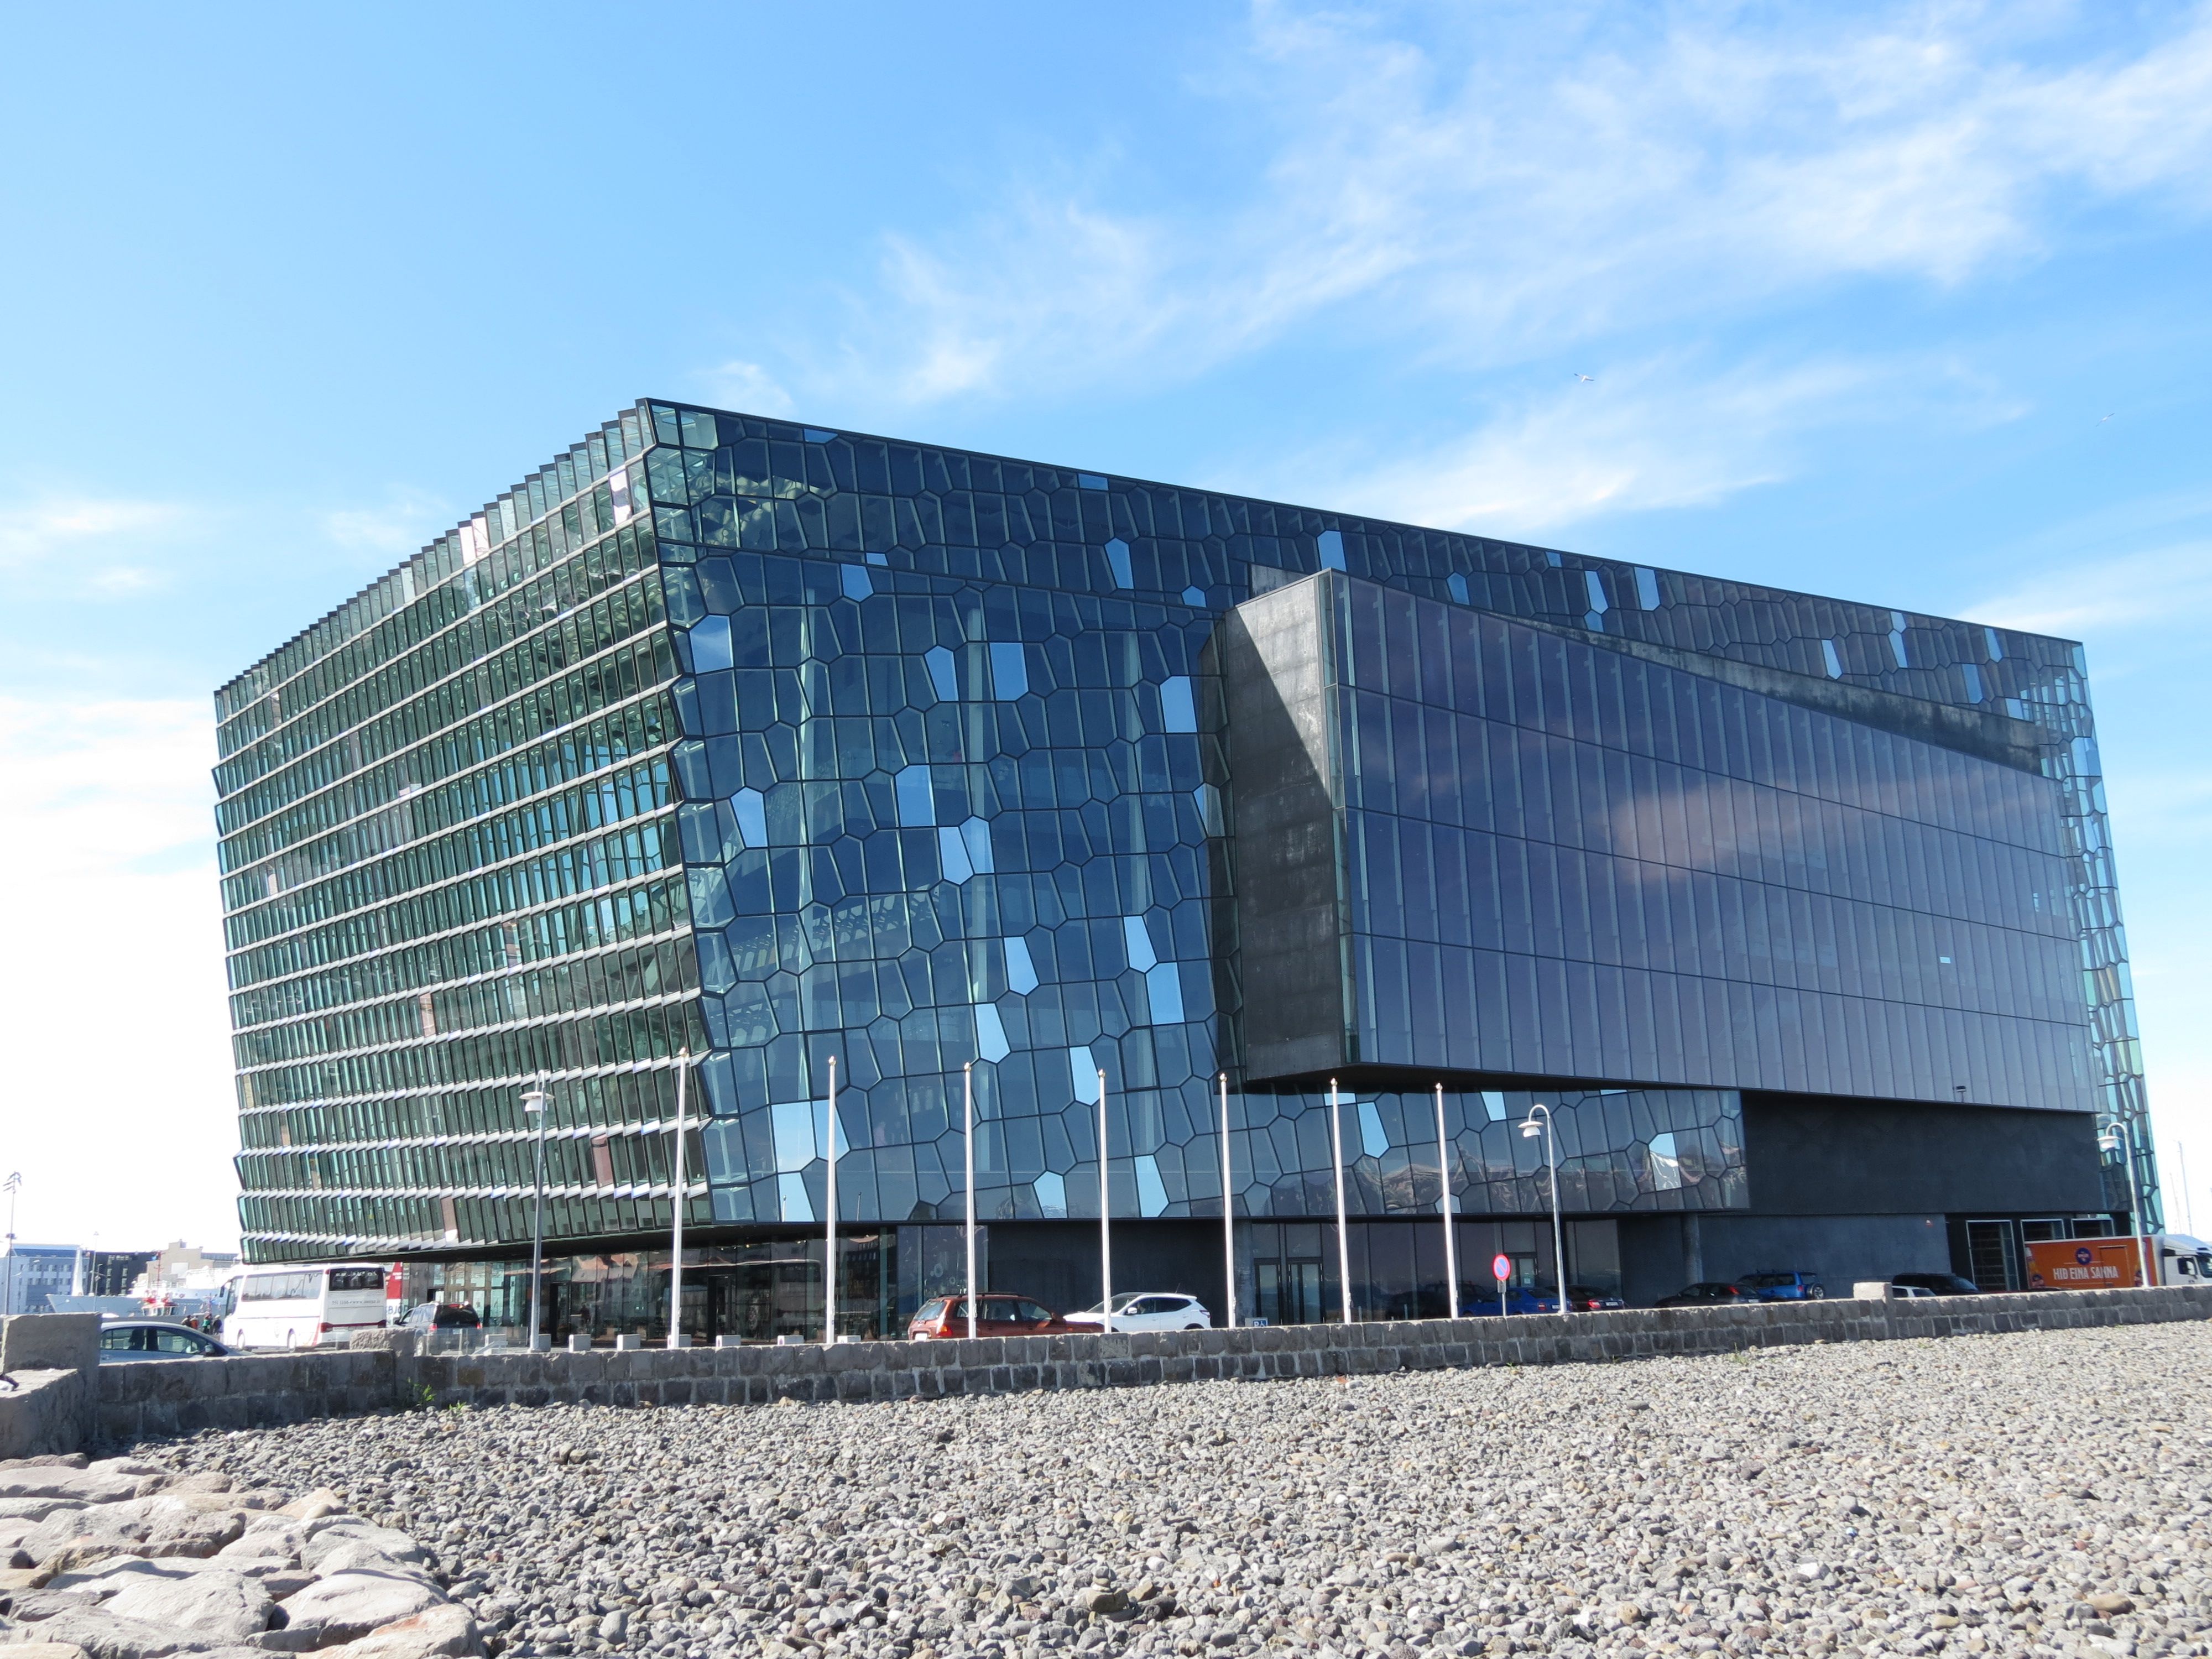 Outside view of the Harpa music hall